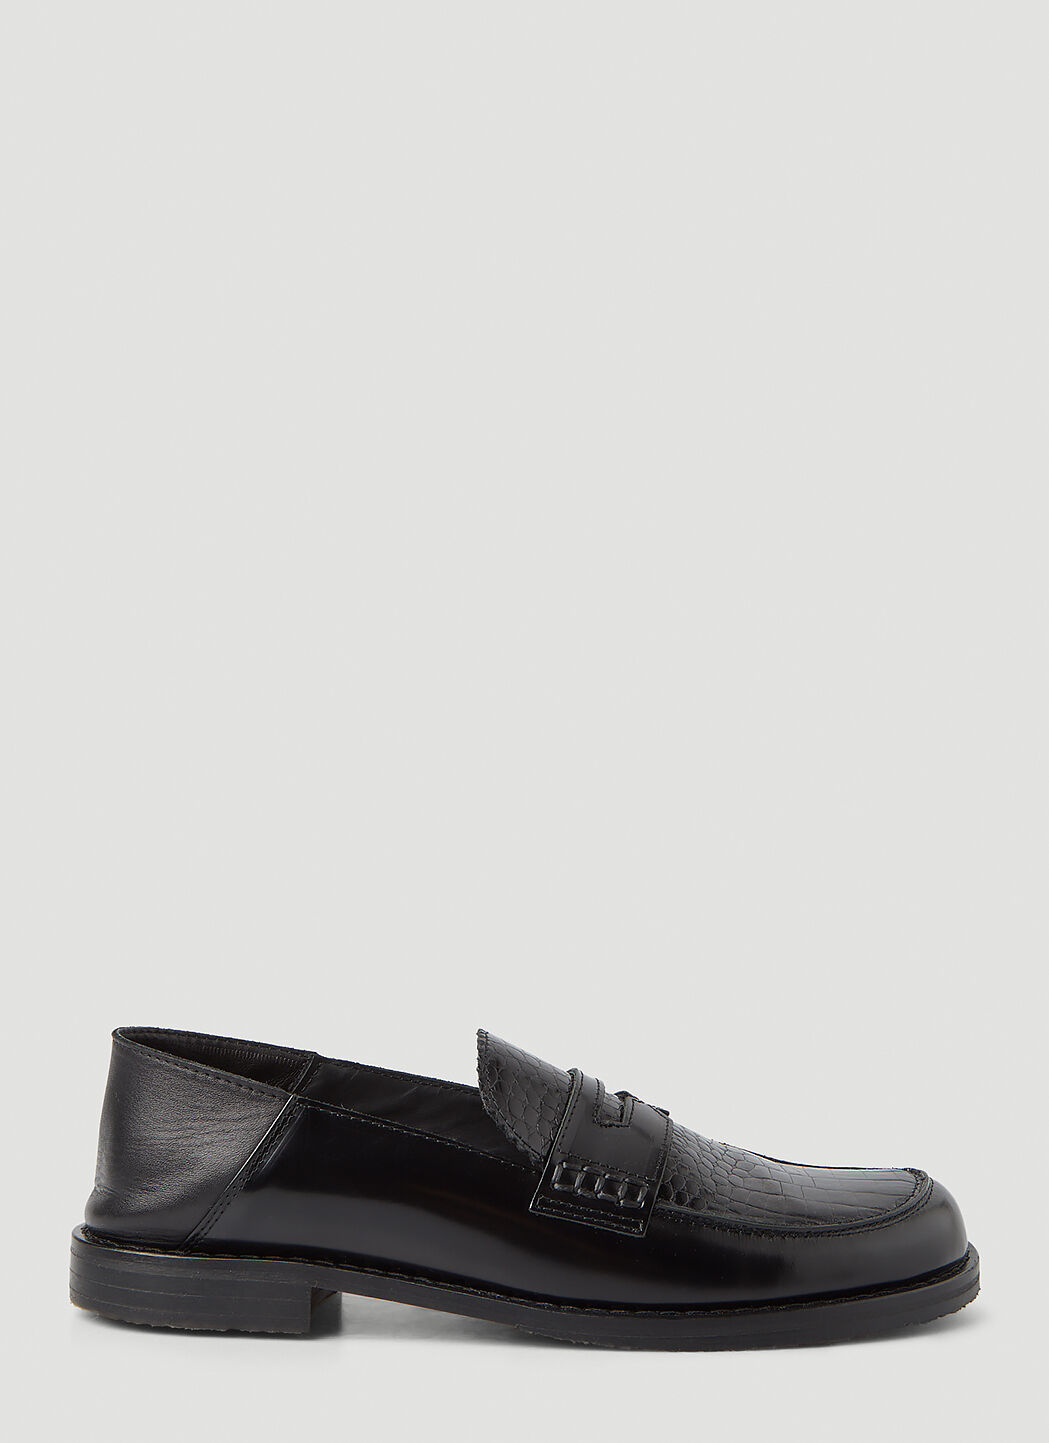 Eytys Otello Penny Loafers in Black | LN-CC®